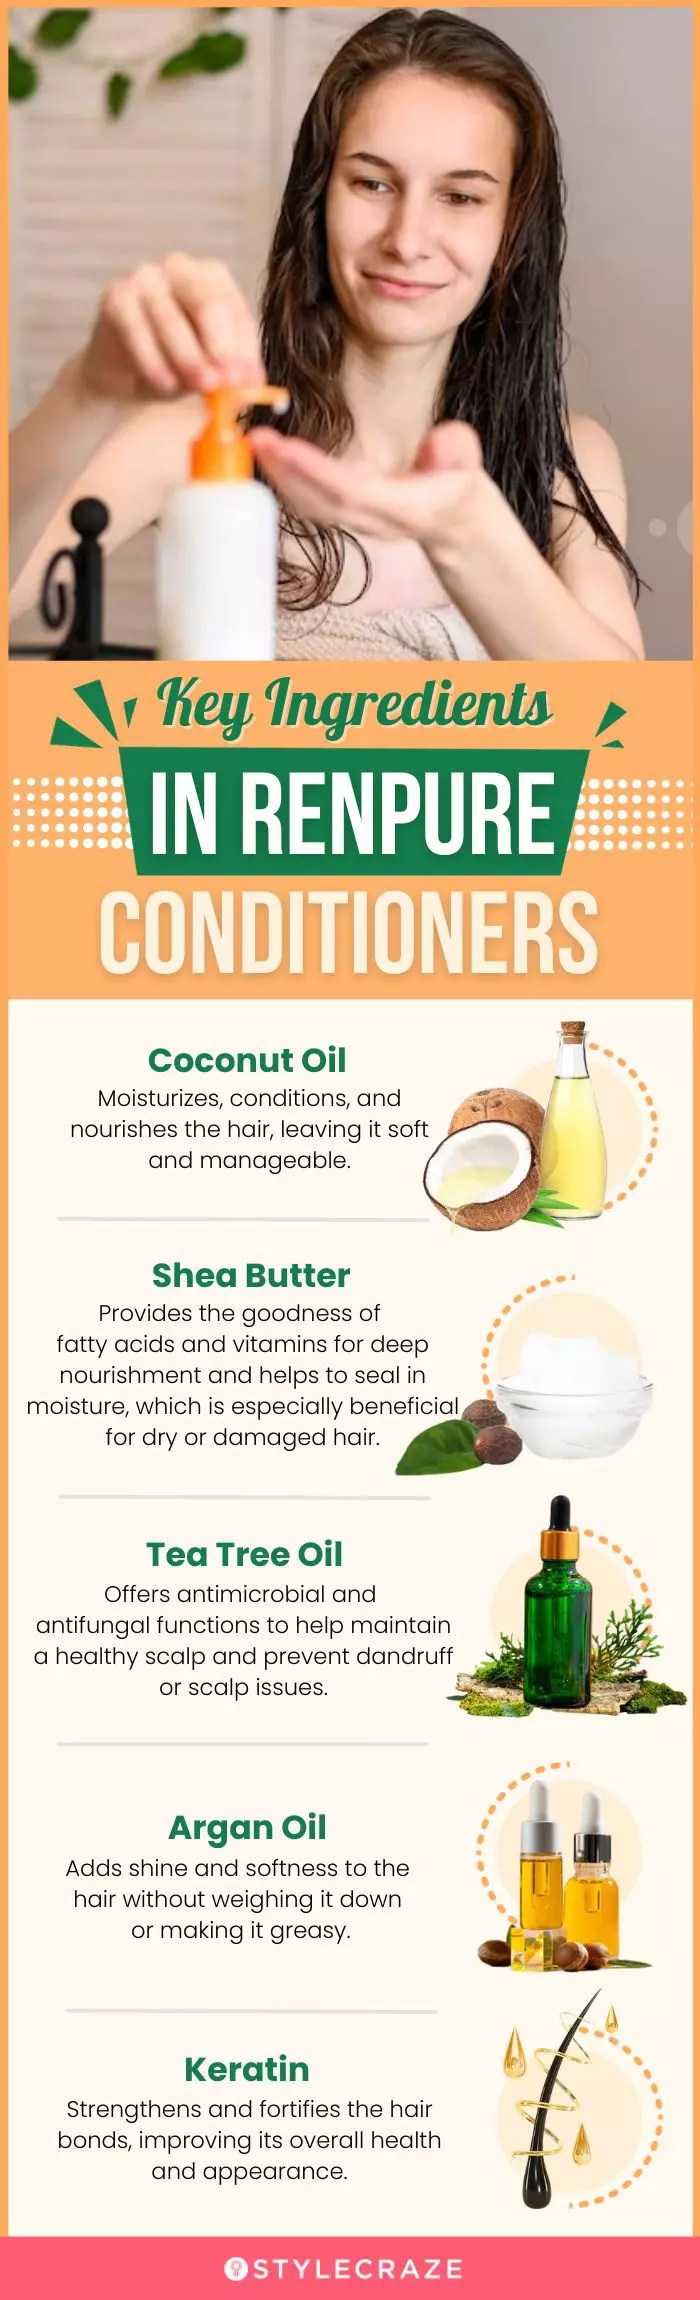 Key Ingredients In Renpure Conditioners (infographic)